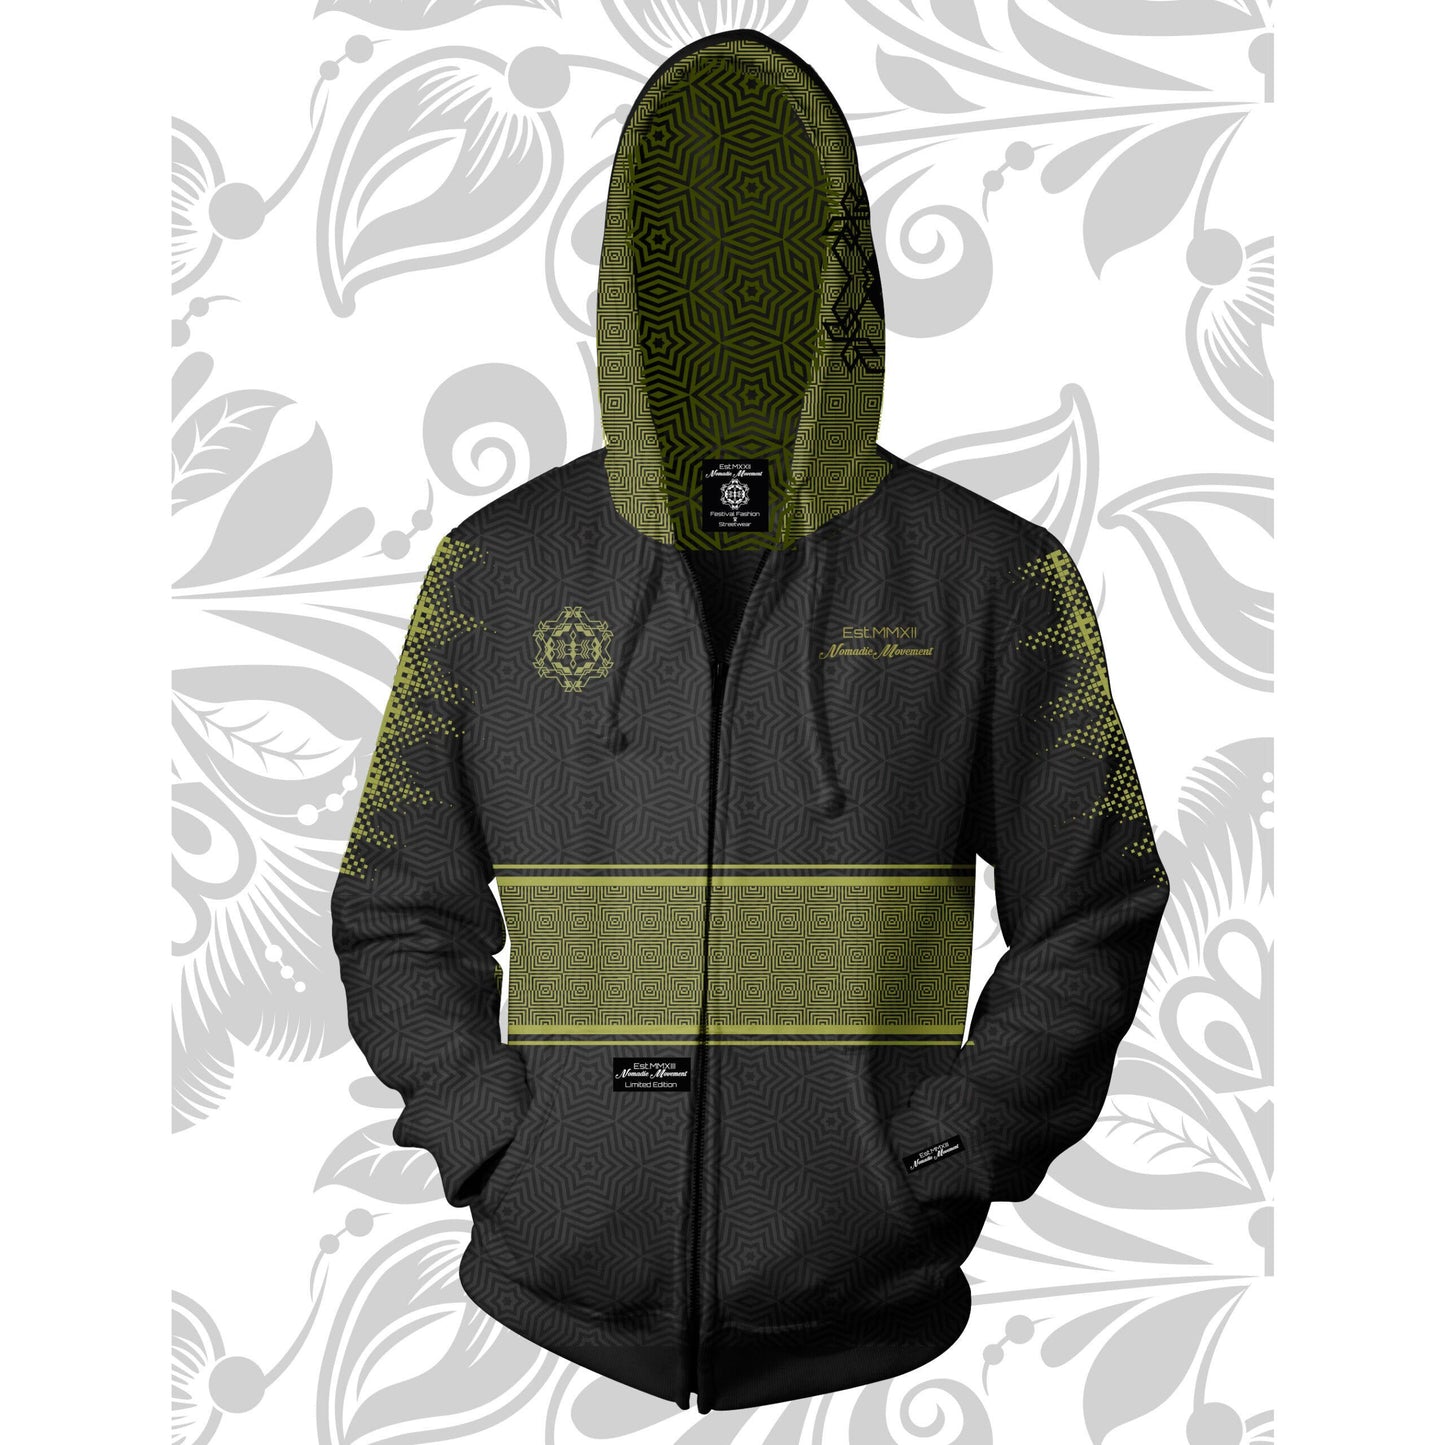 Nomad's Gold Hoodie